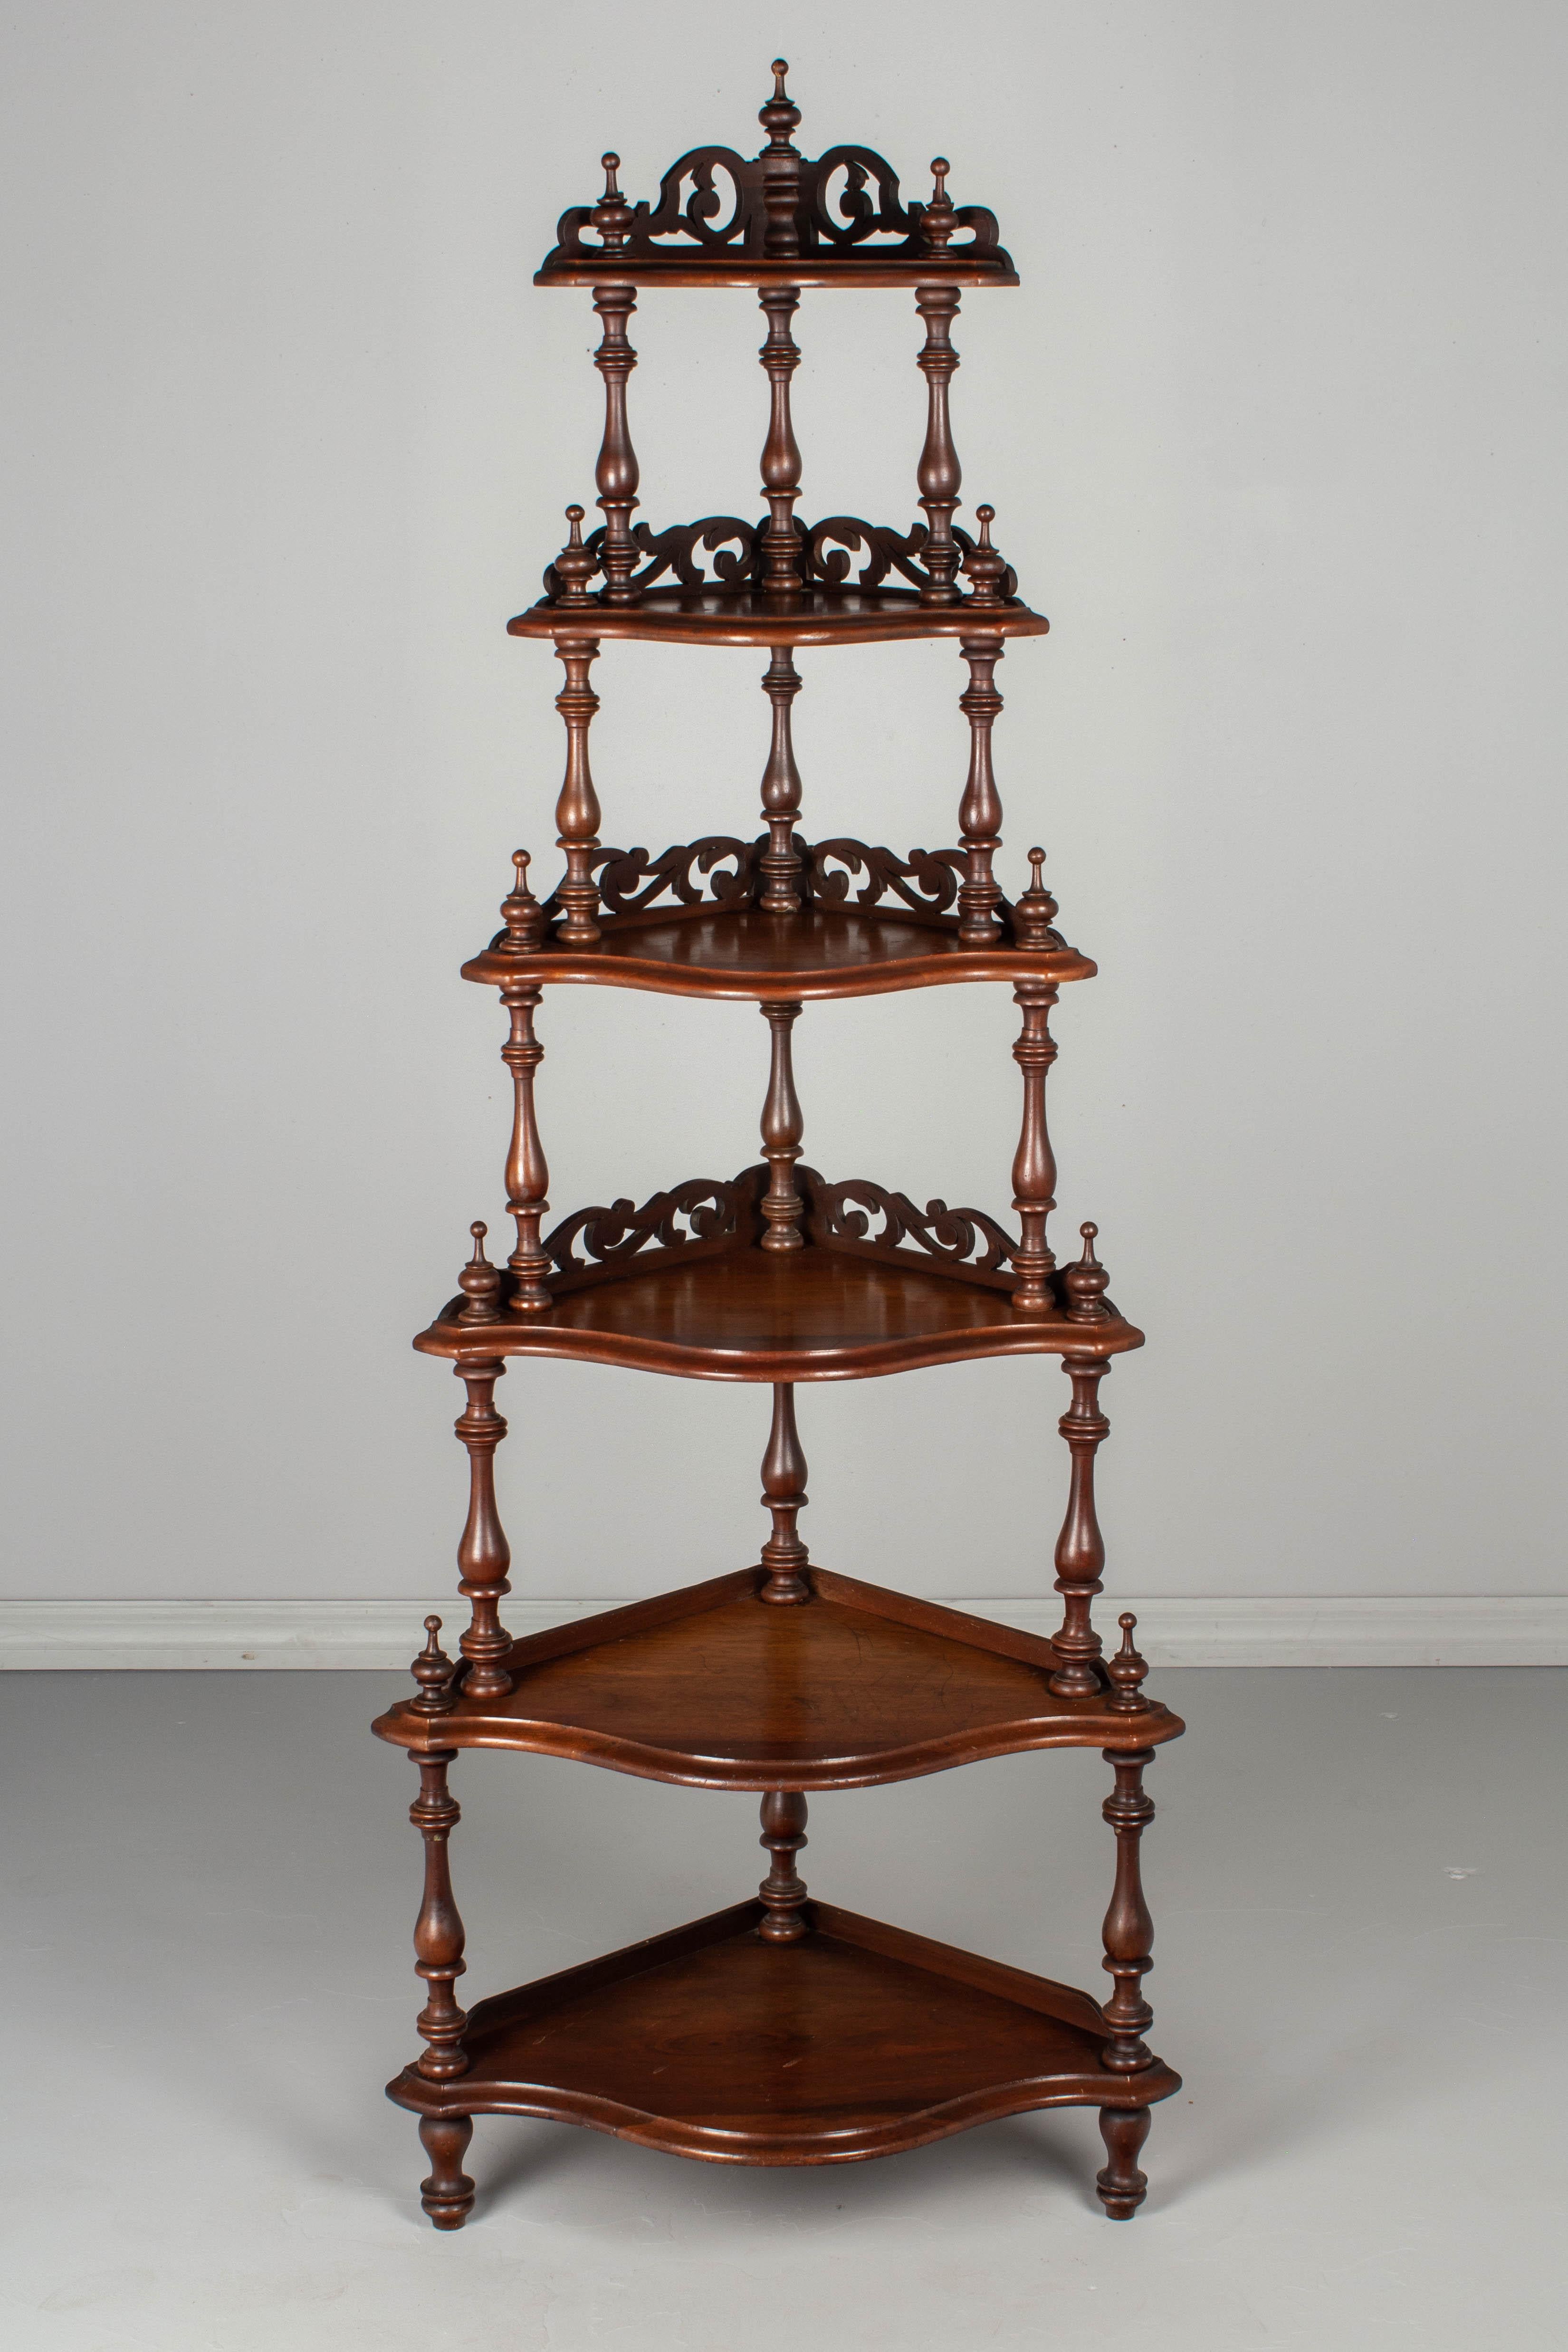 A late 19h century English Victorian mahogany corner étagère with six shelves of graduating width. Decorative turned spindle columns connect the shaped shelves, each with decorative openwork wall cut-outs and corner finials. The spindles will be